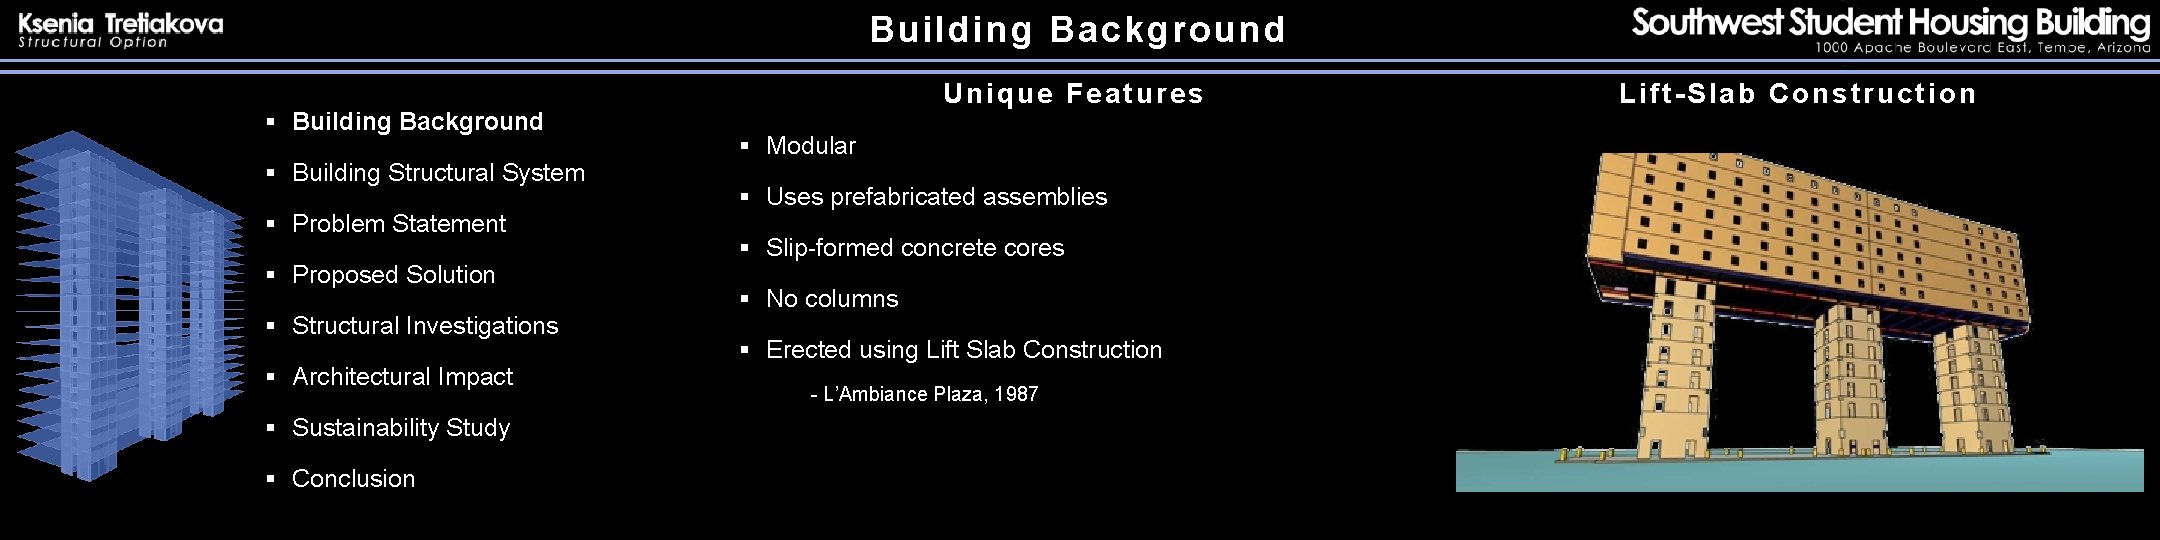 Building Background § Building Structural System § Problem Statement § Proposed Solution § Structural